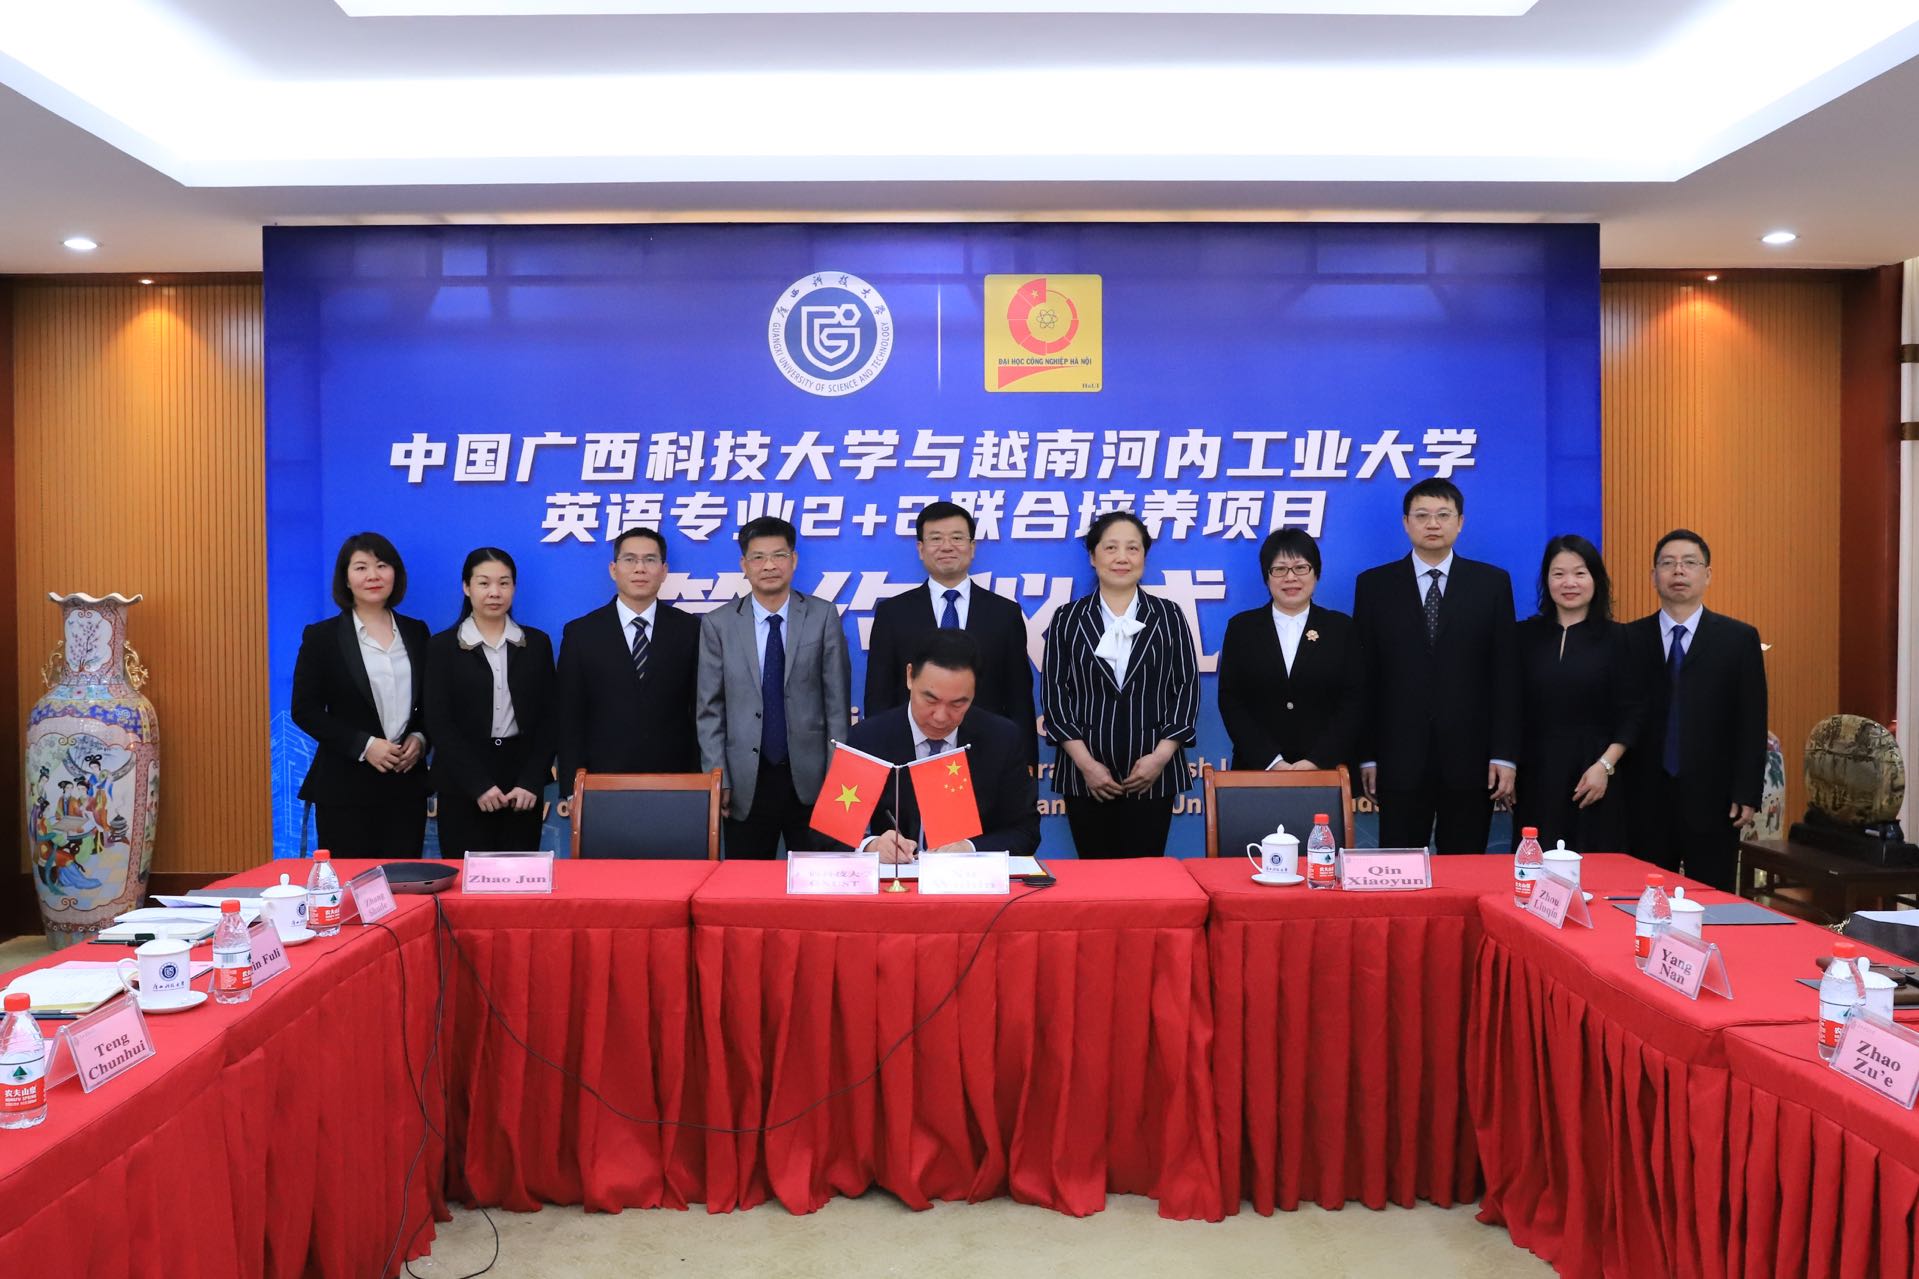 The signing ceremony on cooperation agreement between Hanoi University of Industry and Guangxi University of Science and Technology